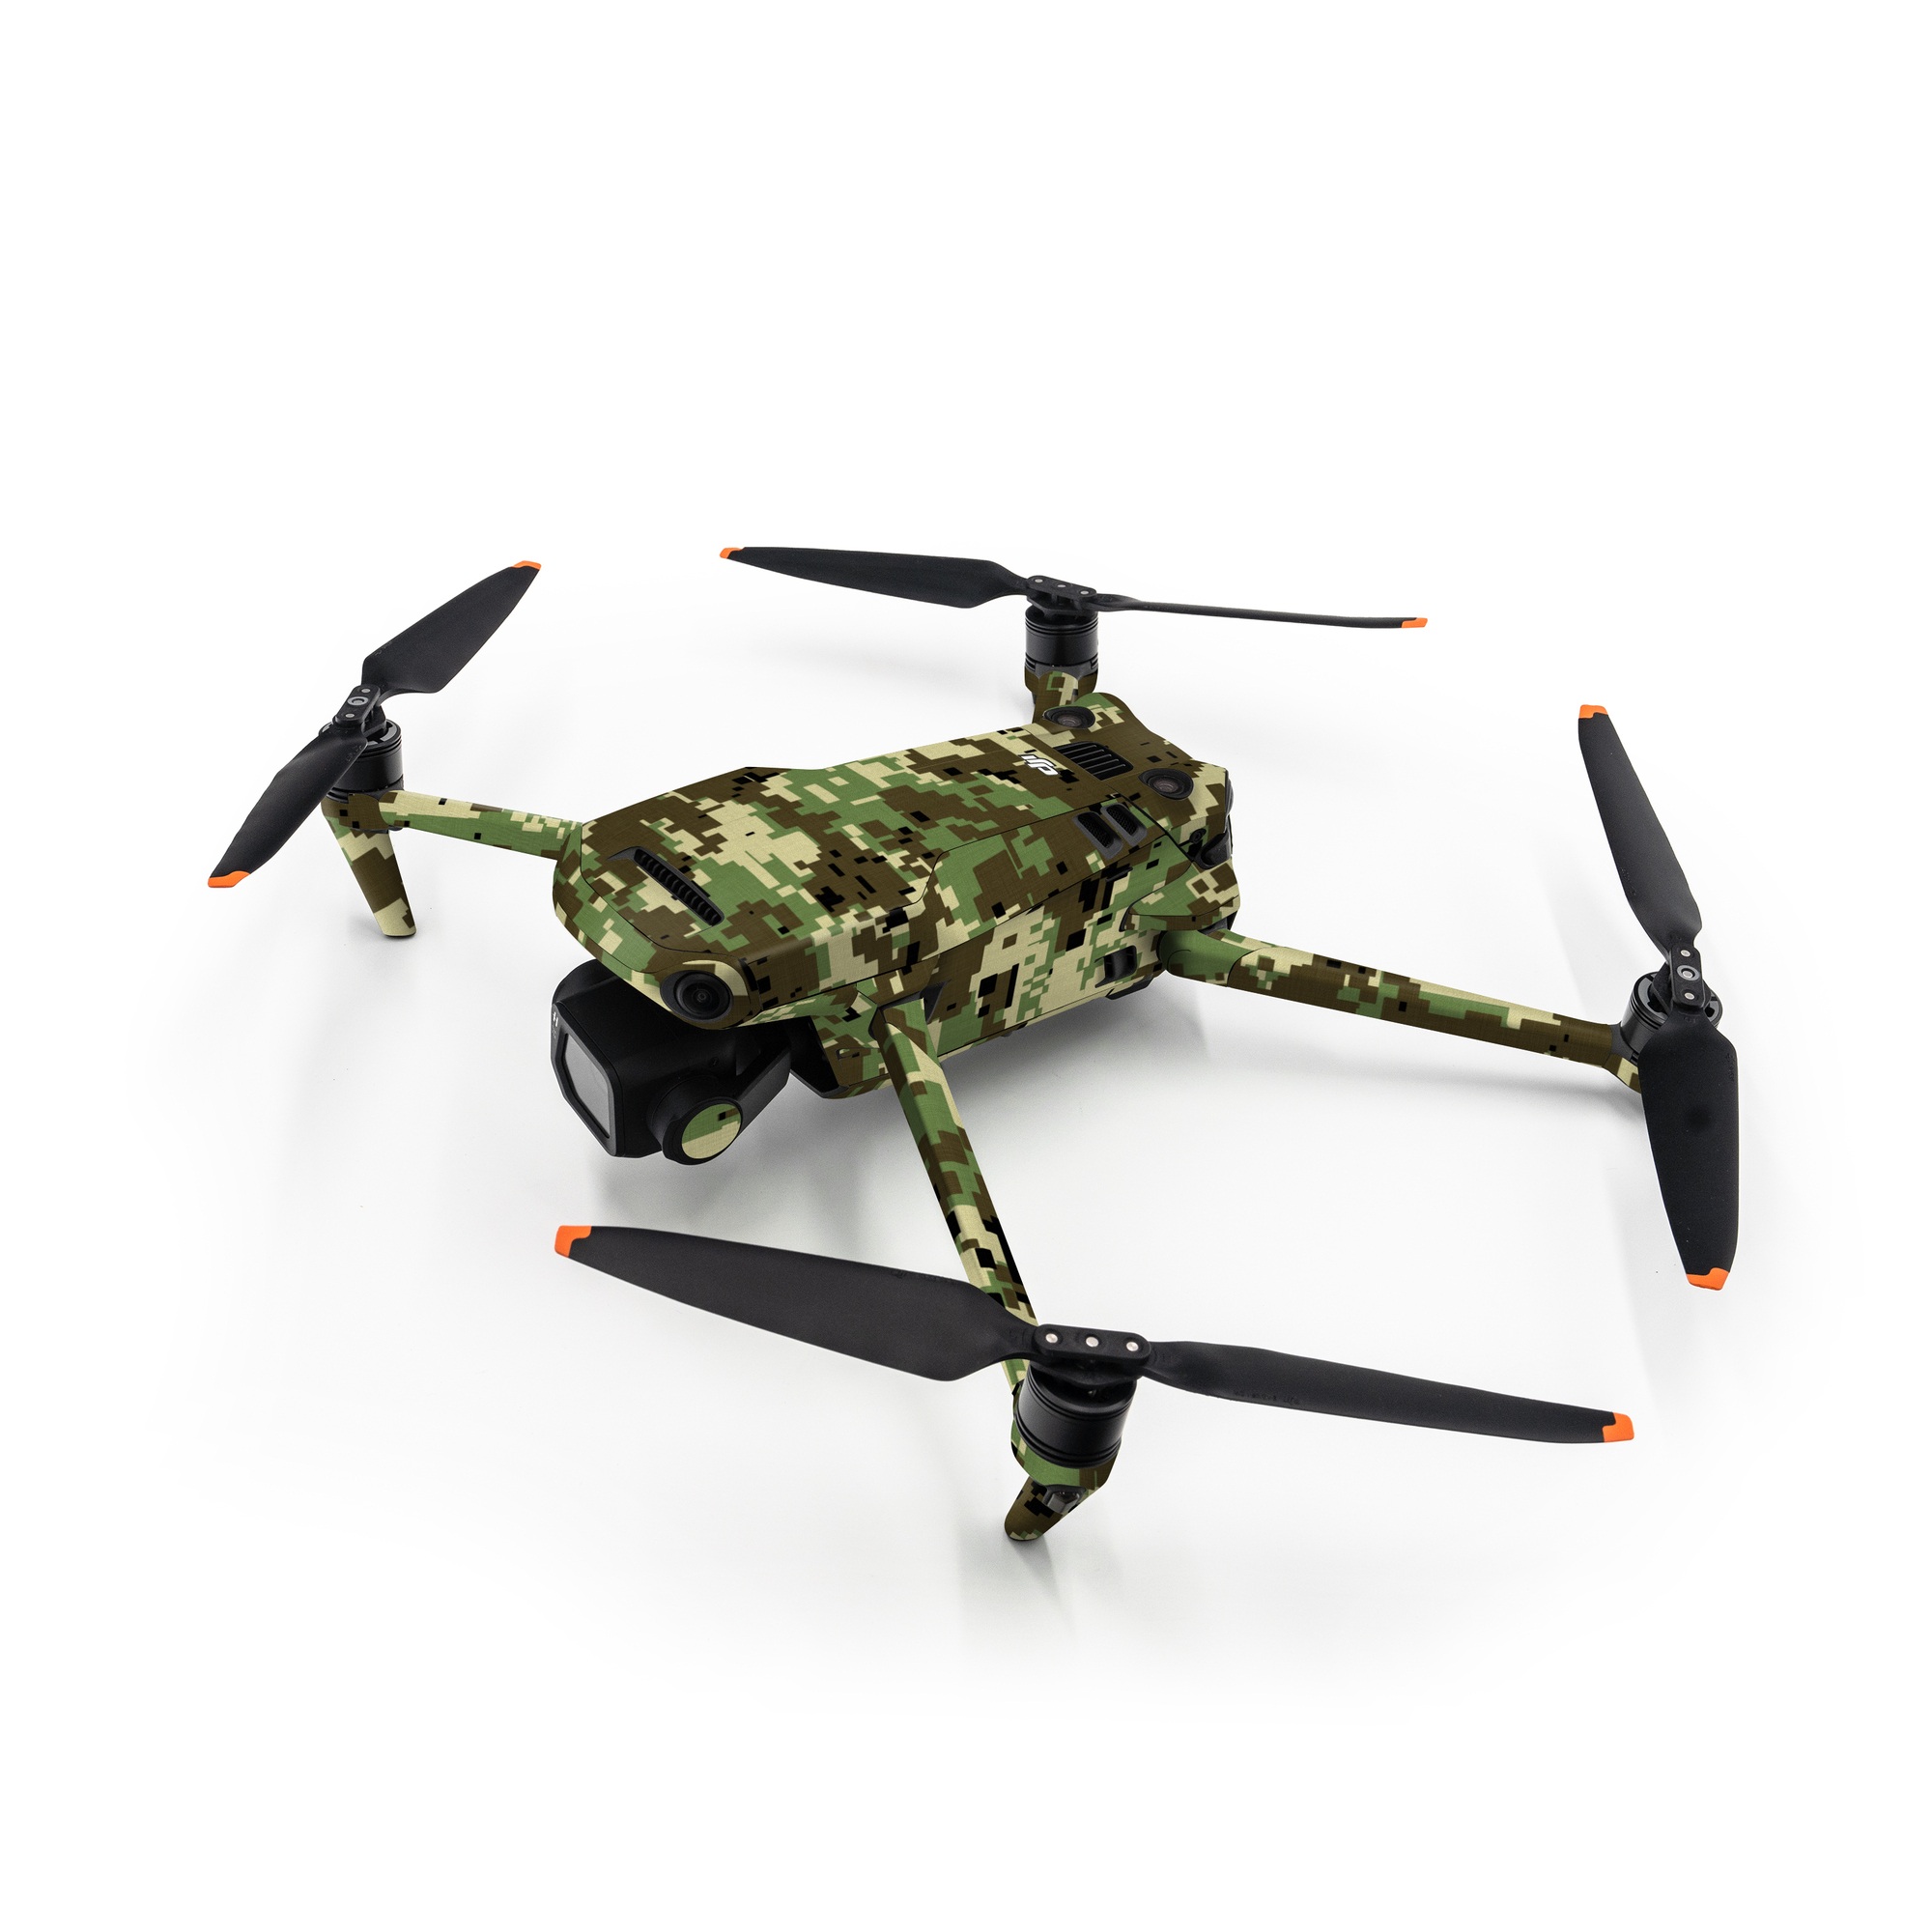 DJI Mavic 3 Skin design of Military camouflage, Pattern, Camouflage, Green, Uniform, Clothing, Design, Military uniform, with black, gray, green colors